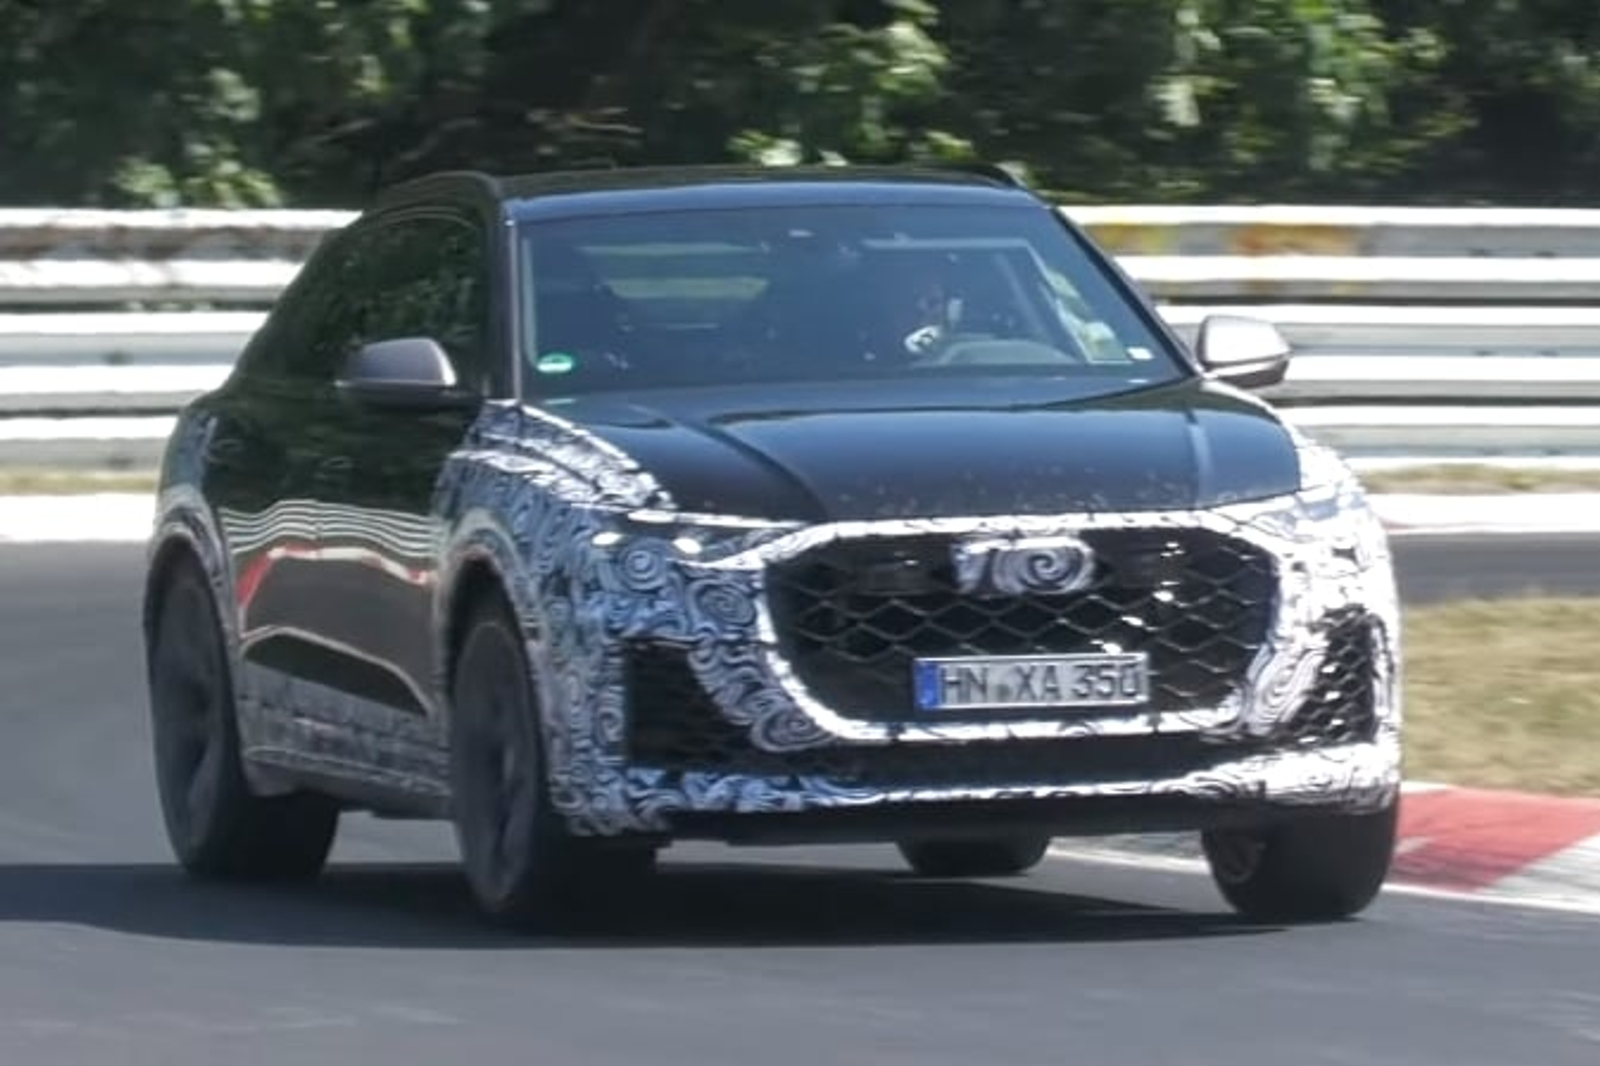 video, spy shots, sports cars, nurburgring, new audi rs q8 prototype spied testing at nurburgring